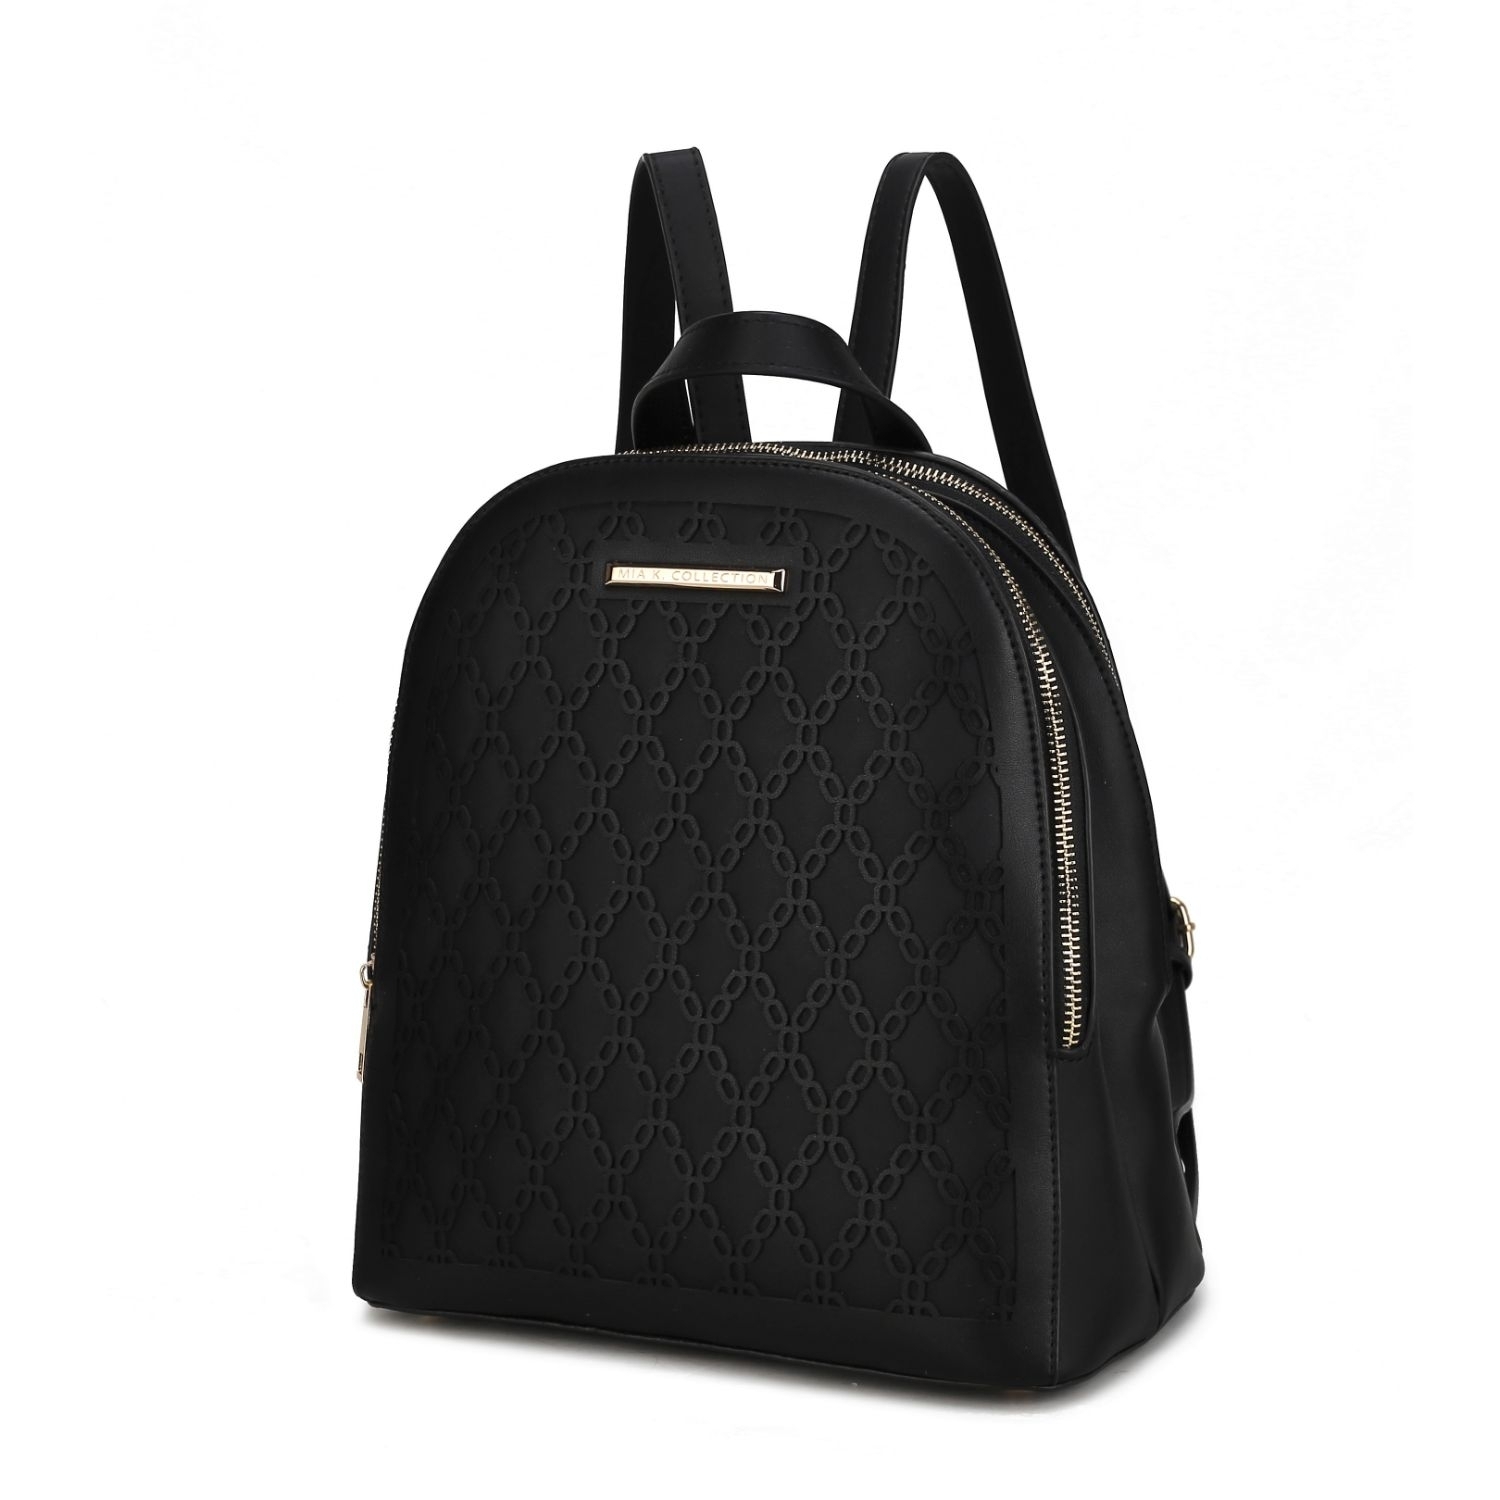 MKF Collection Sloane Vegan Leather Multi Compartment Backpack By Mia K. - Black